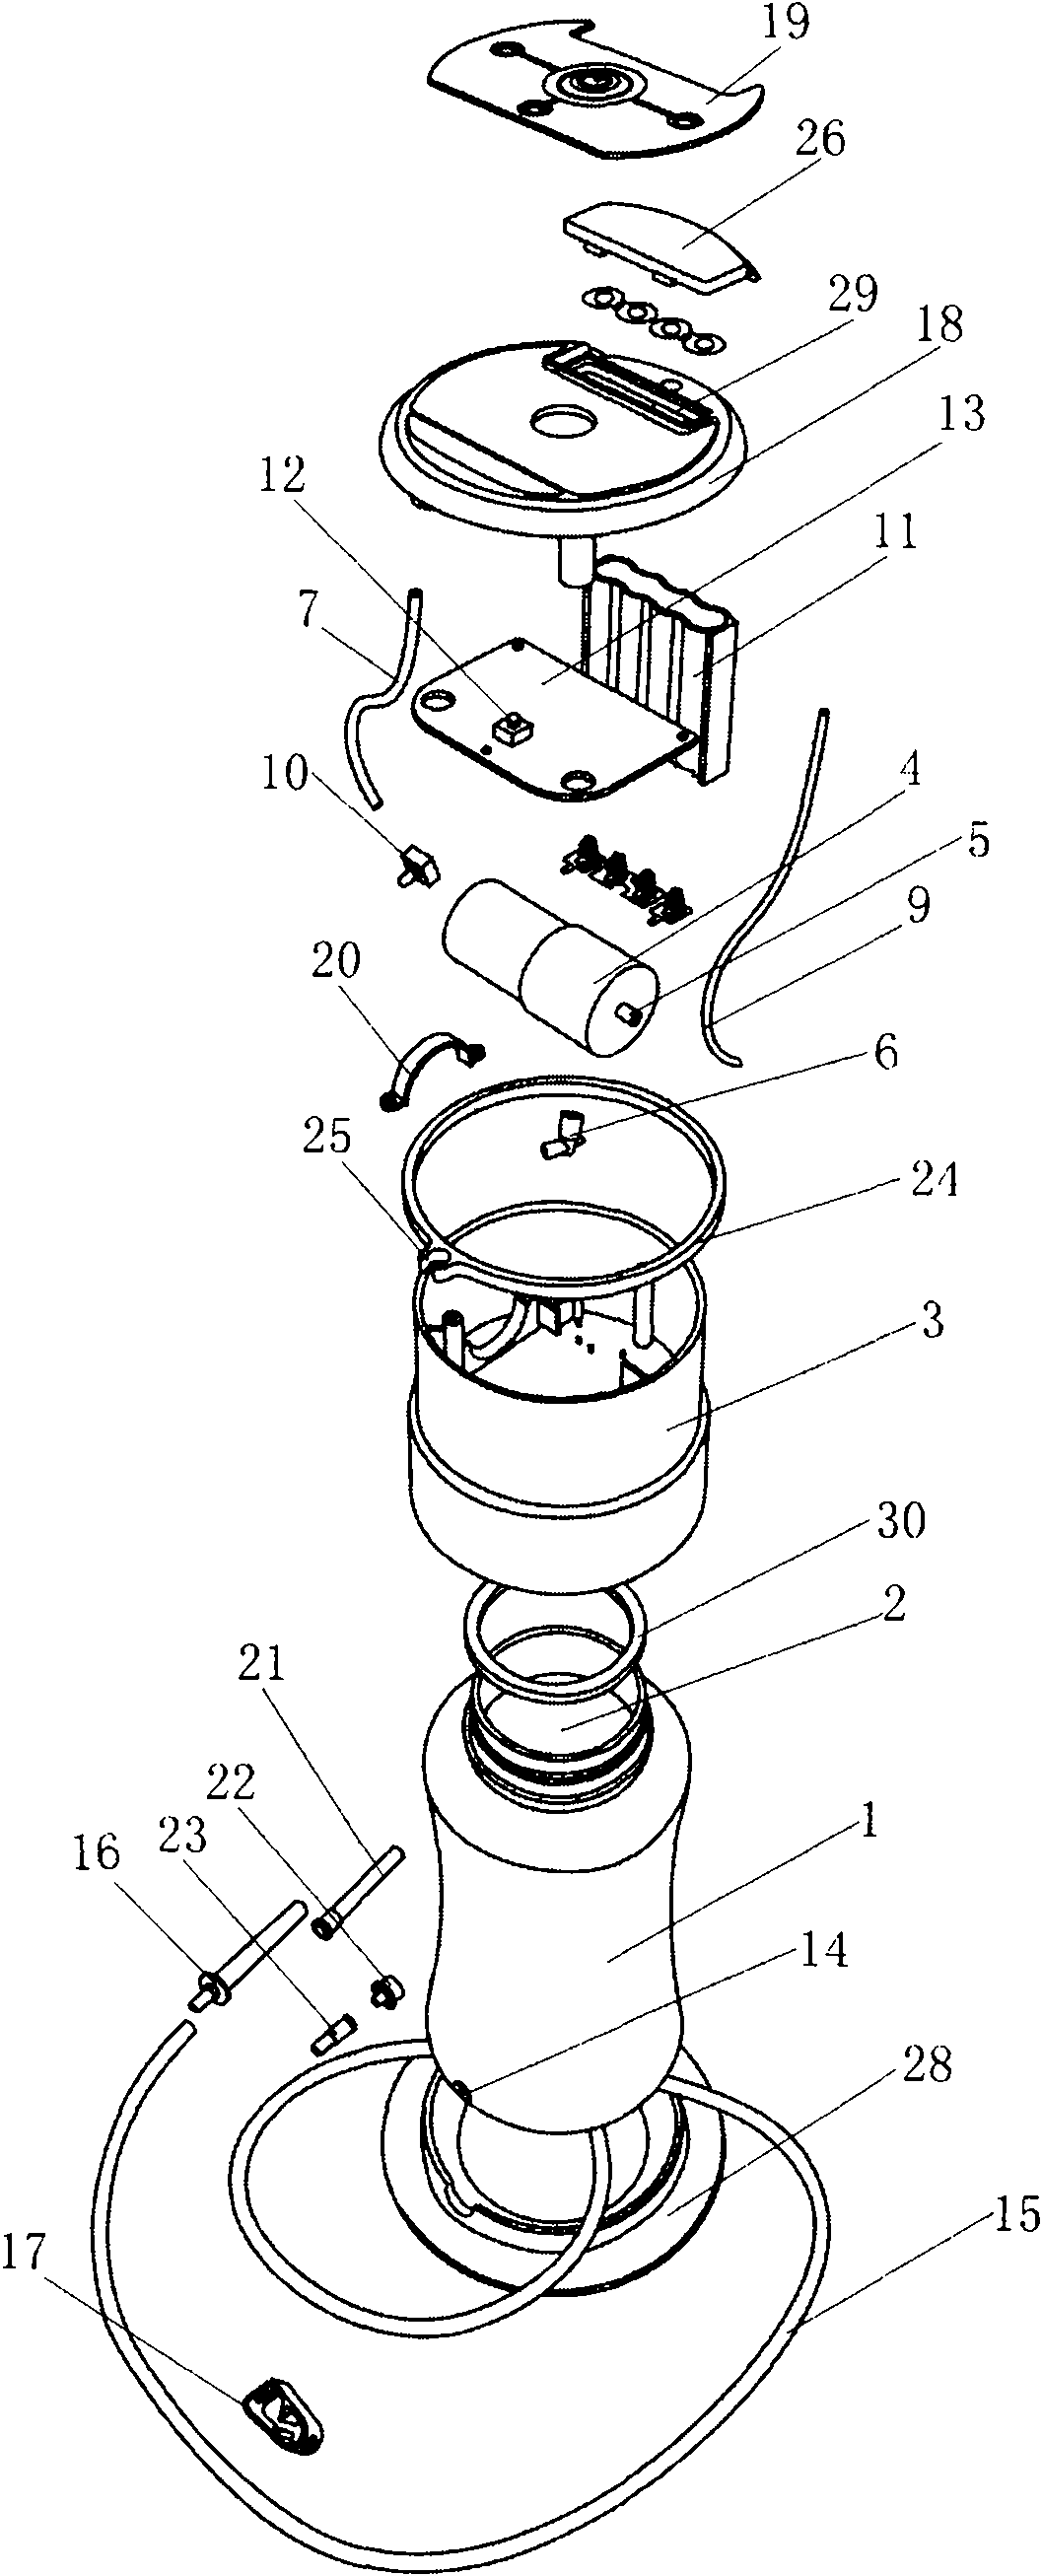 Full-automatic defecating and bowel clearing device